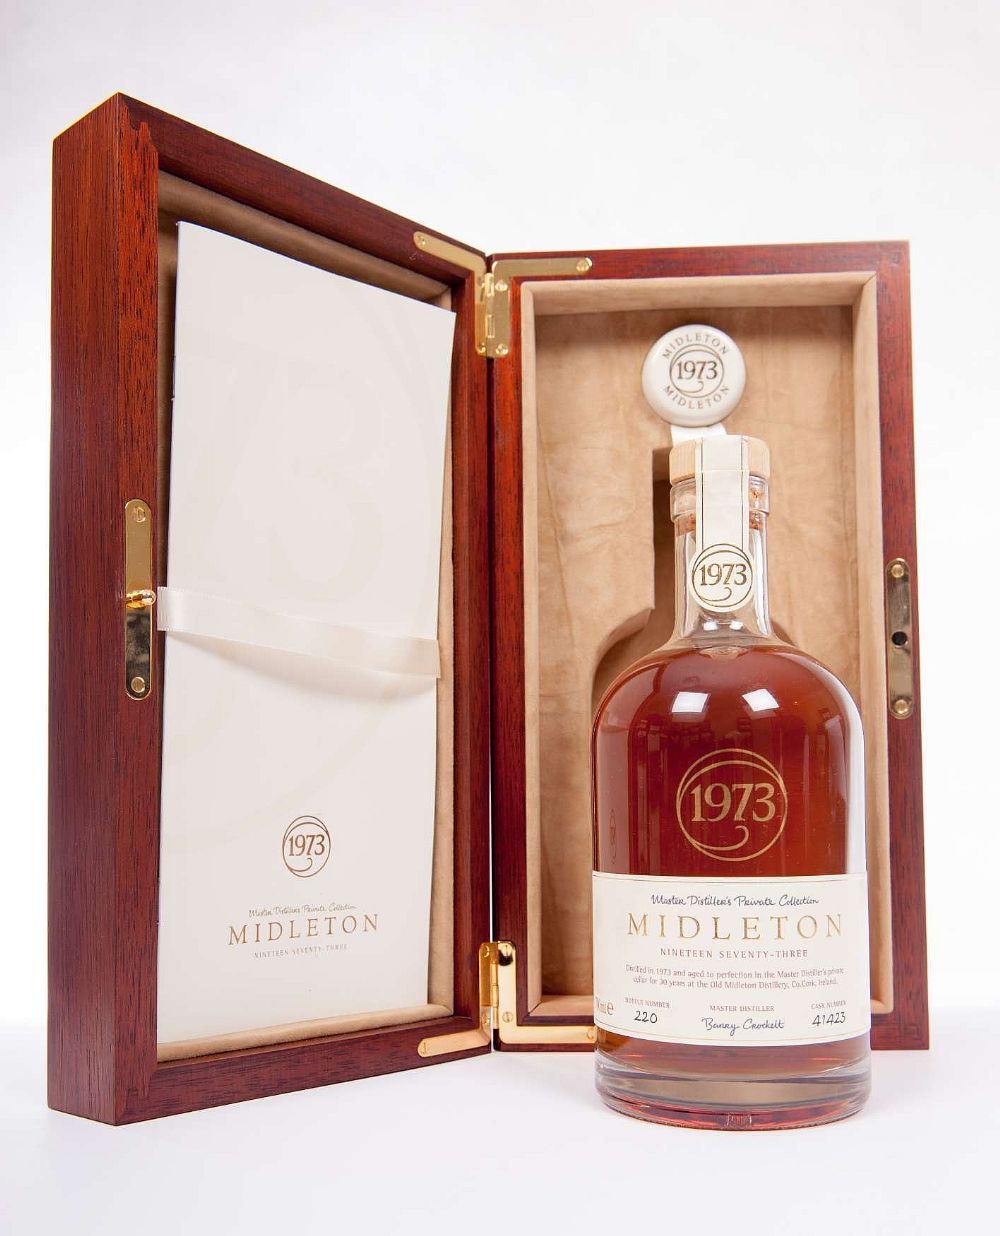 Midleton 1973 Master Distillers Private Collection, 30 year old